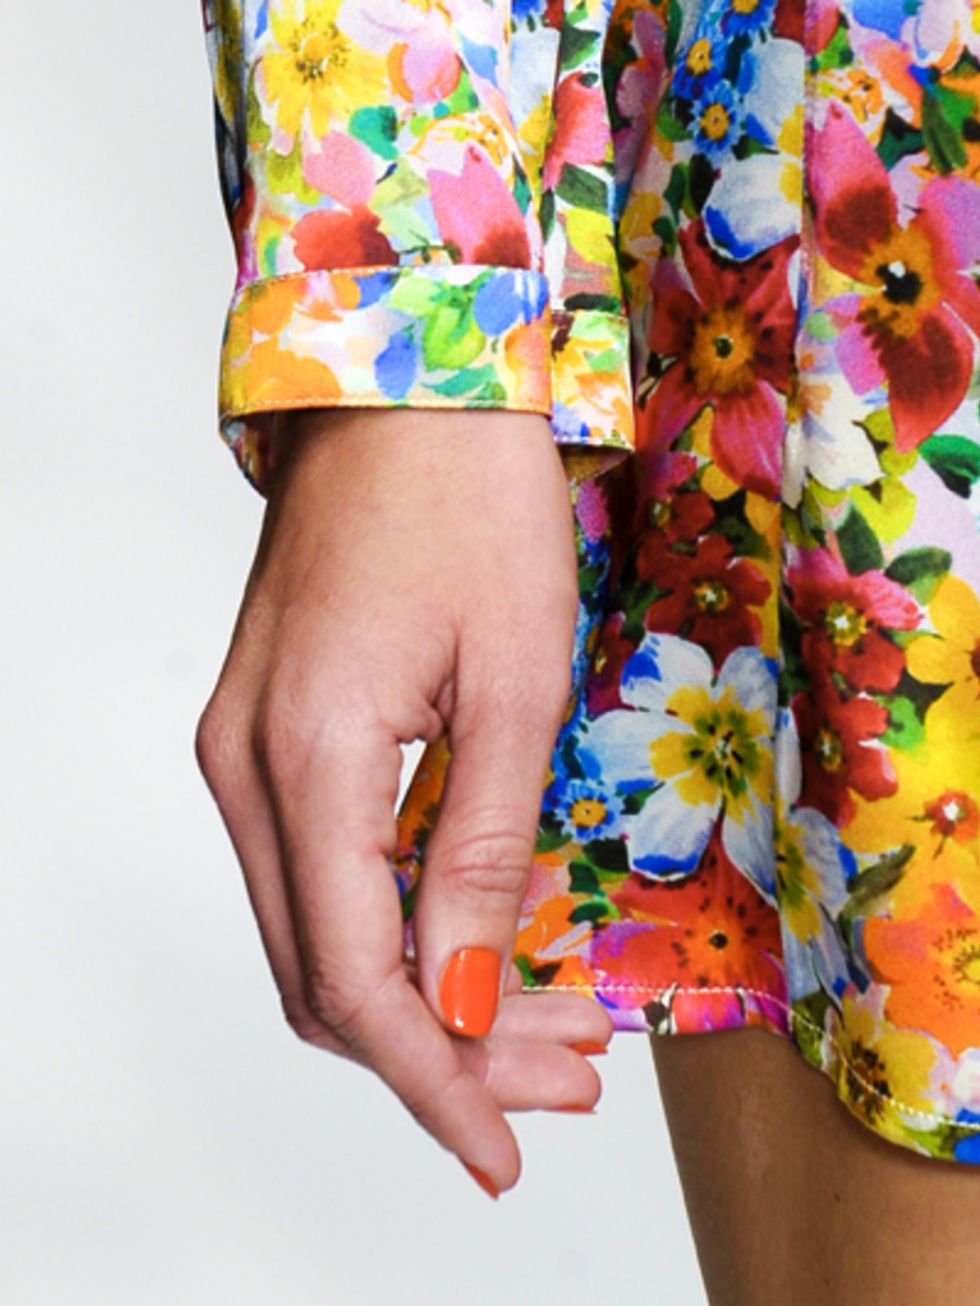 Finger, Yellow, Orange, Nail, Colorfulness, People in nature, Pattern, Peach, Day dress, Nail polish, 